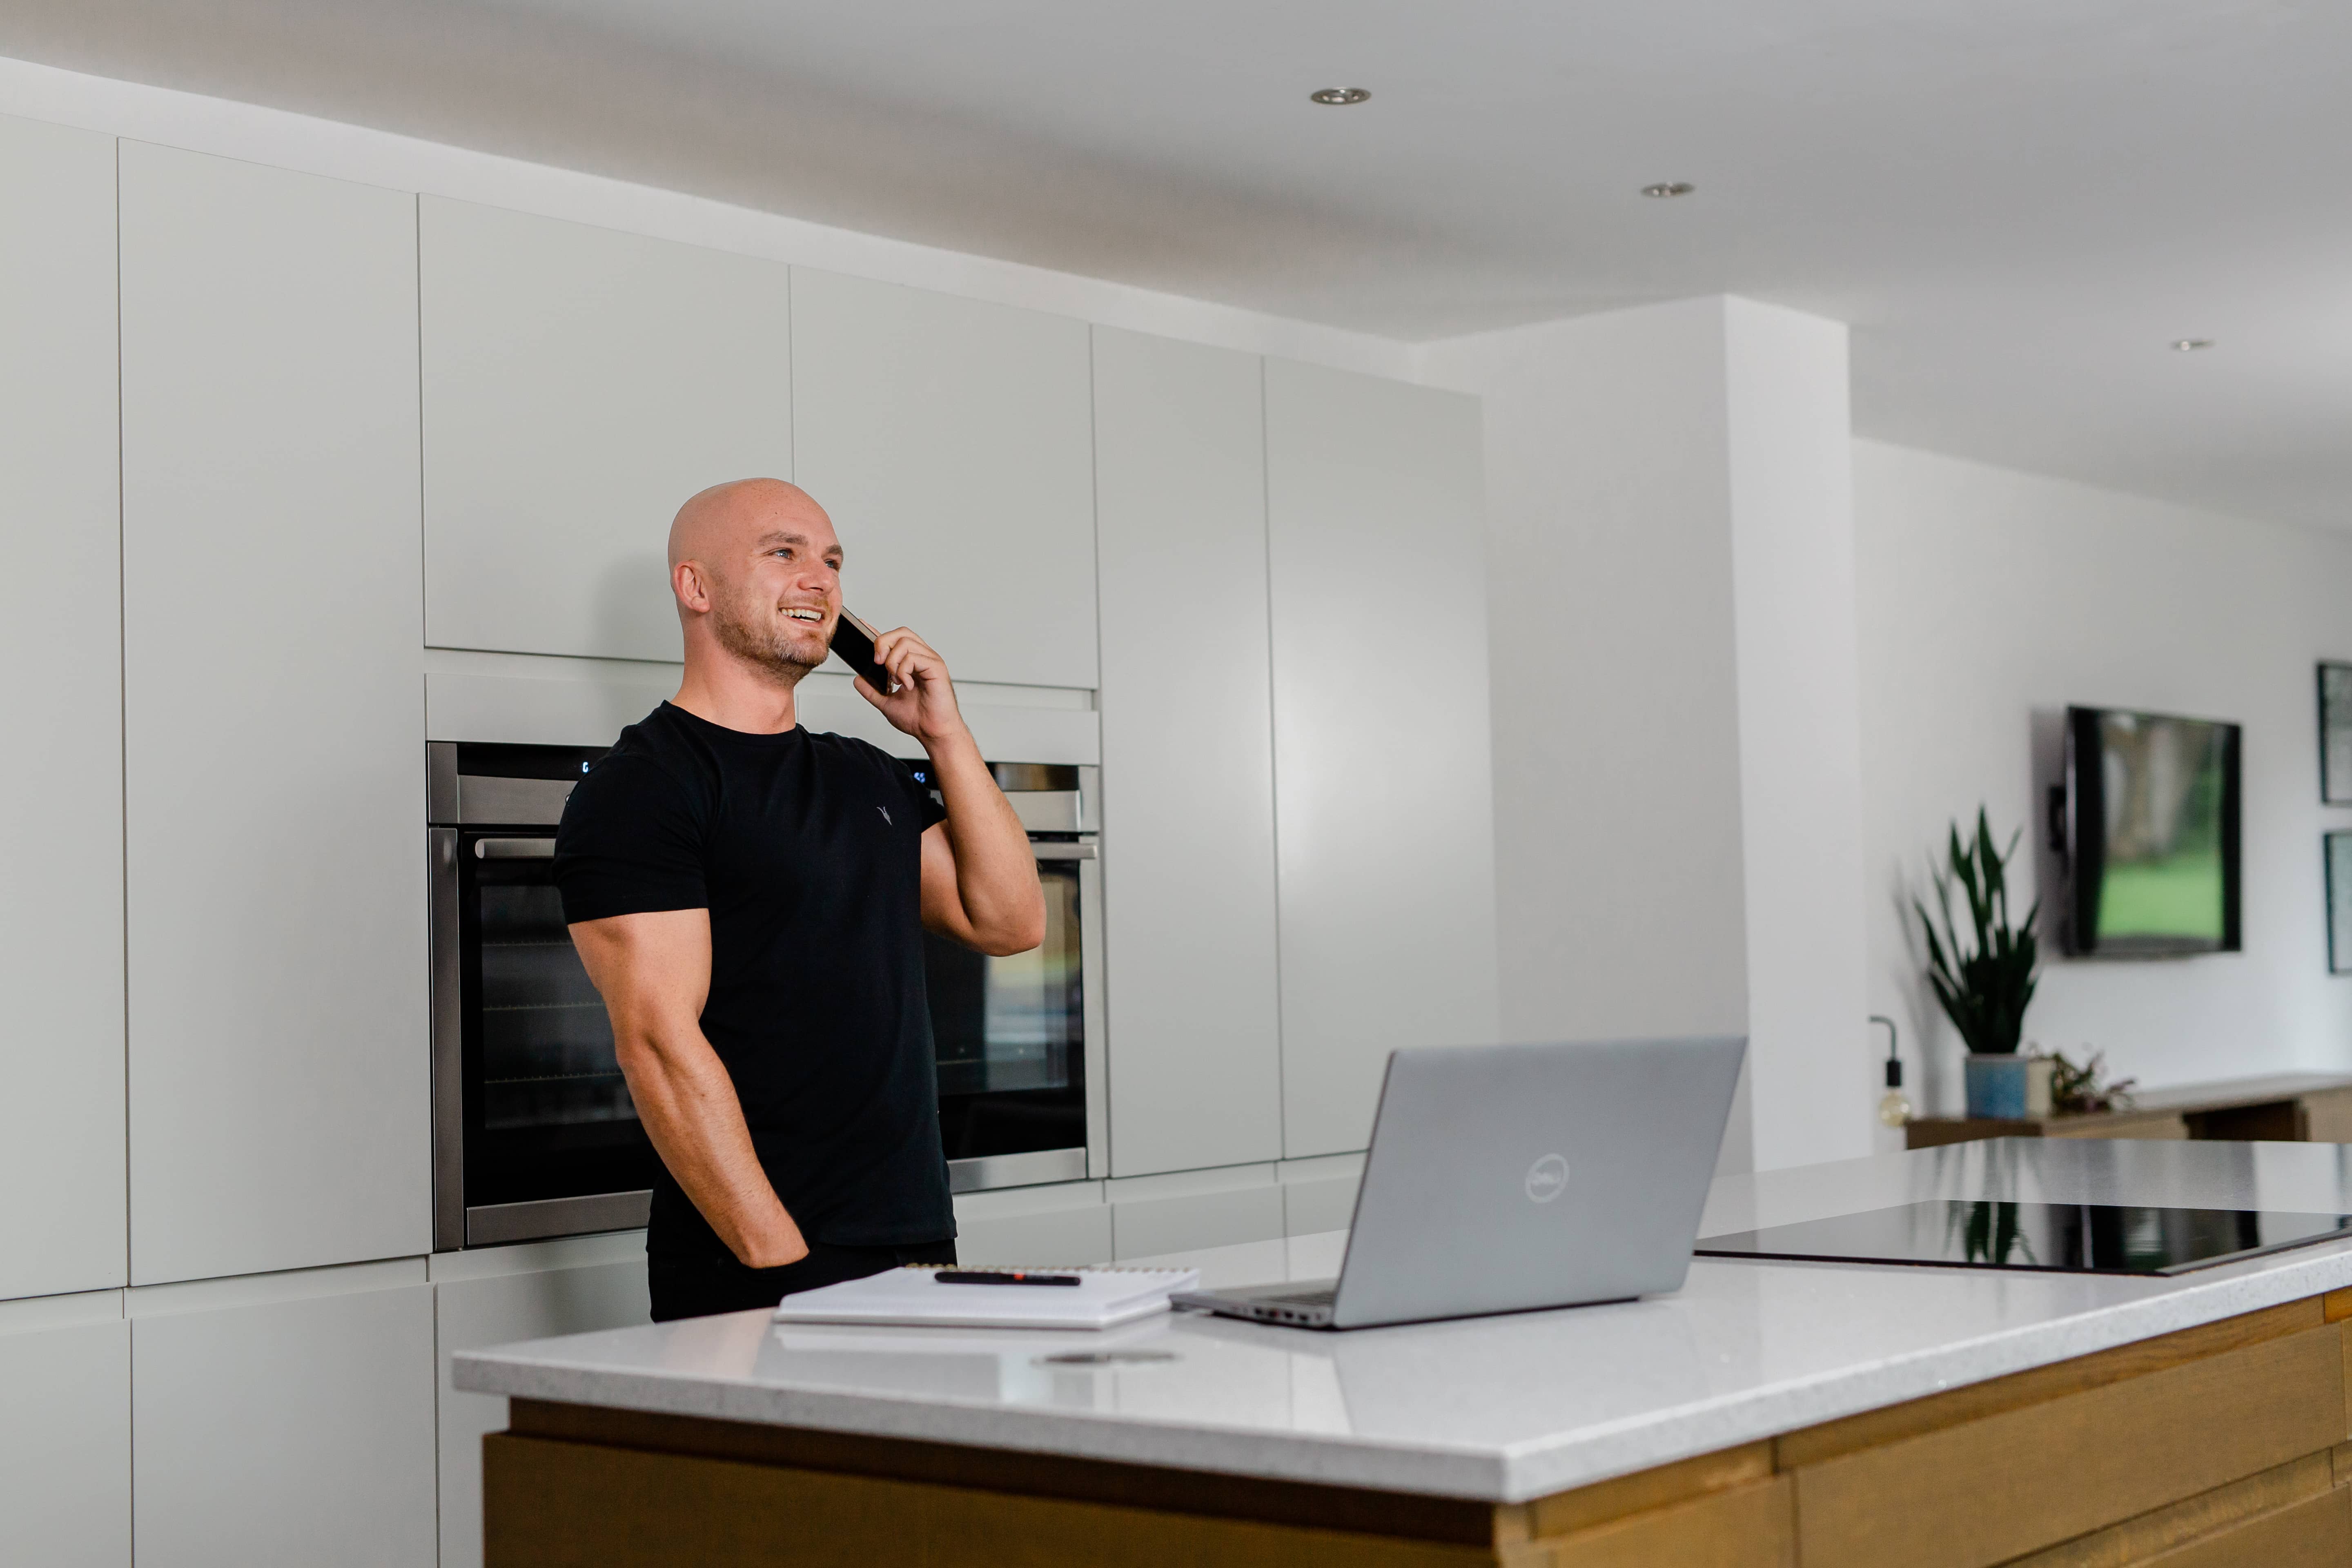 Man in a black shirt standing in a sleek modern kitchen with white walls, speaking to a customer on his phone